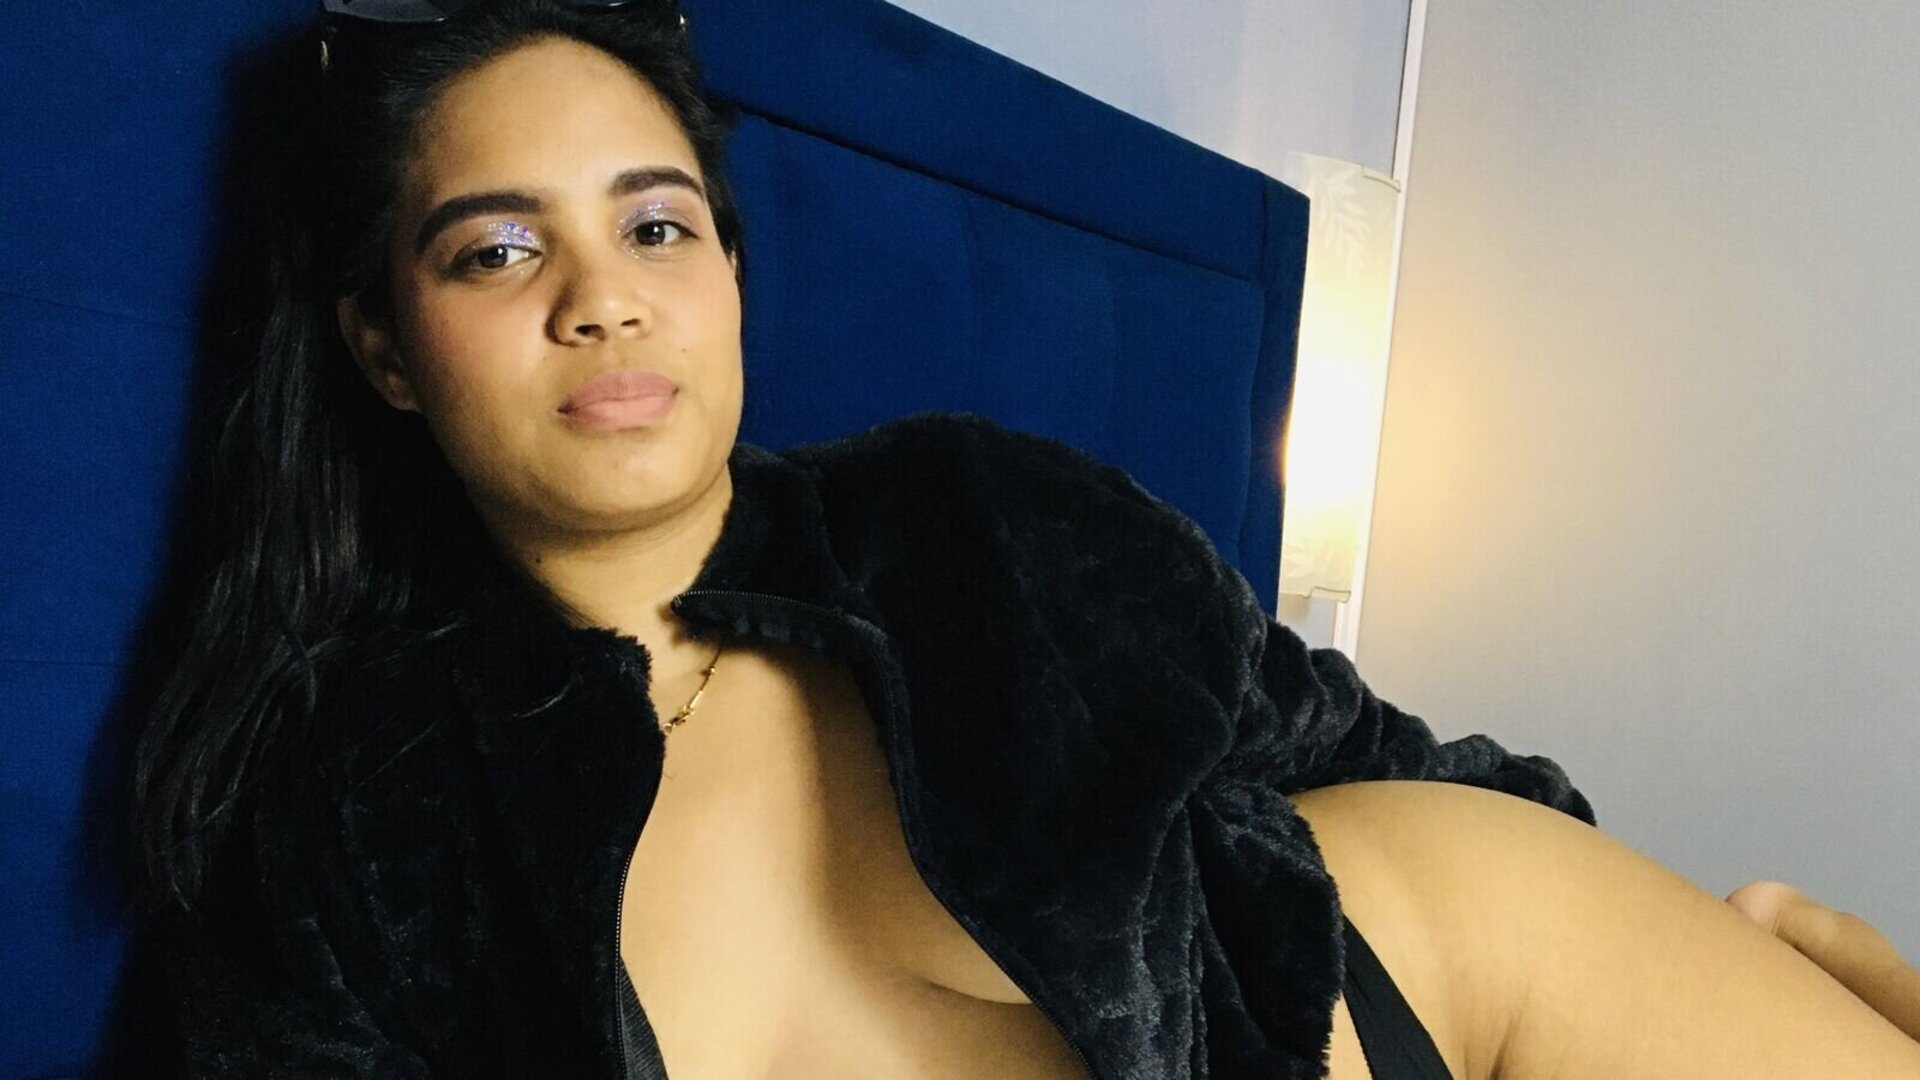 ZulayArias's Live Nude Chat